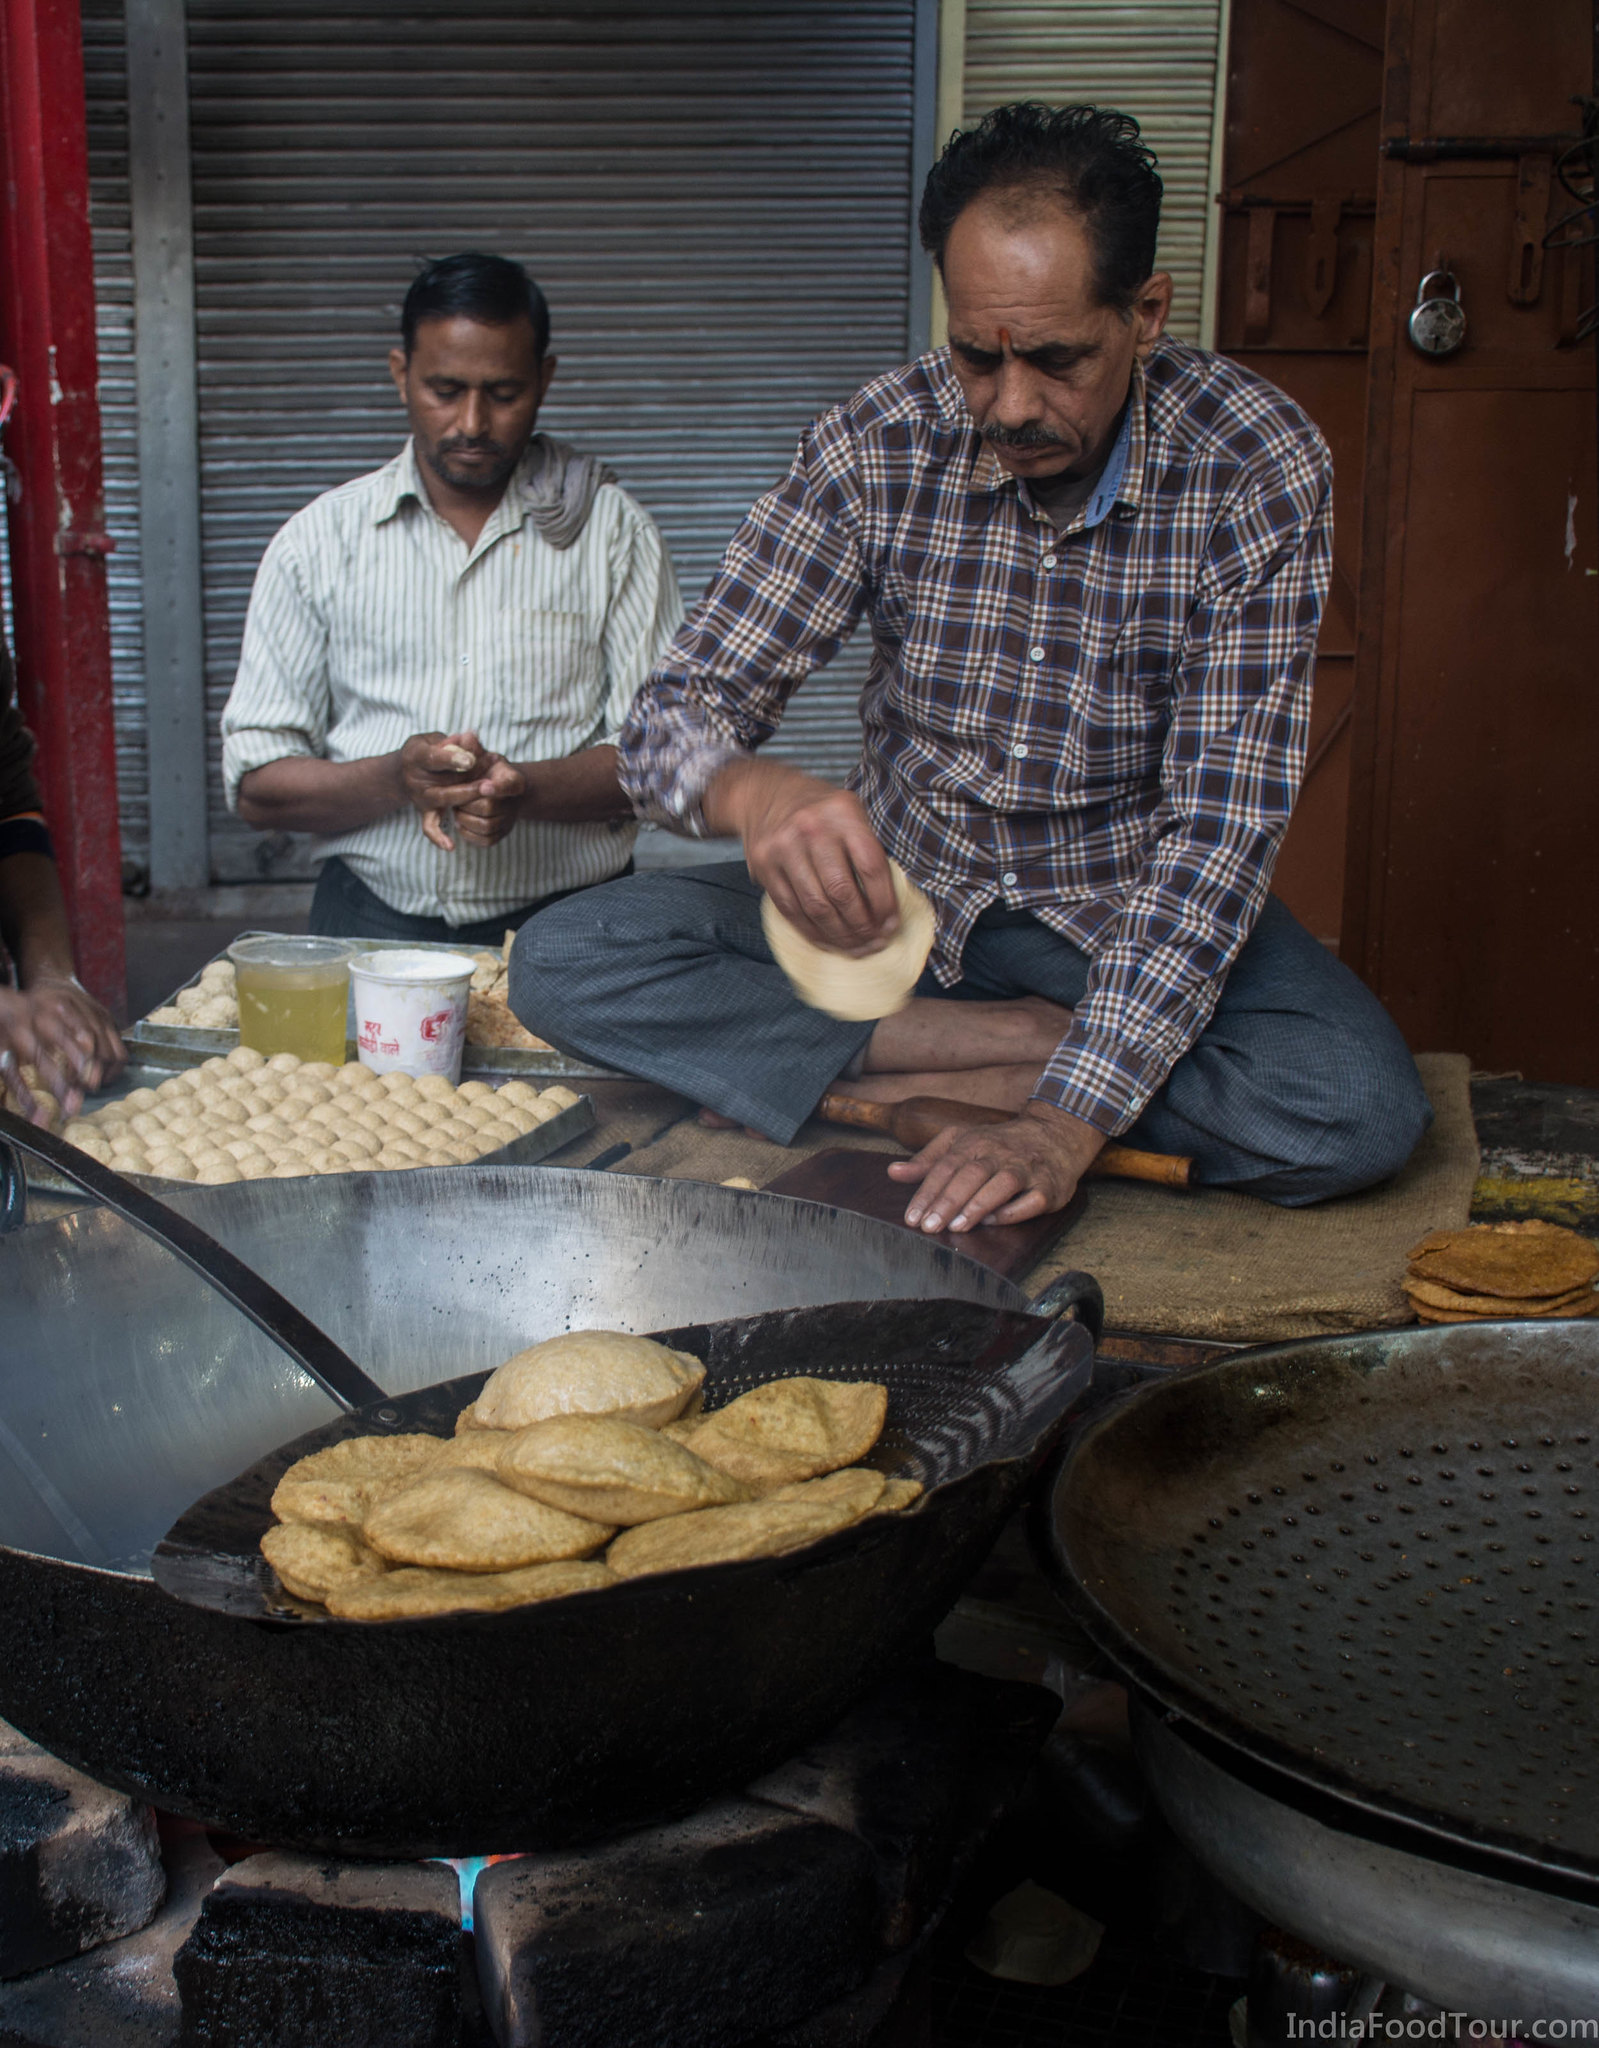 Workers in a food shop cooking Puri